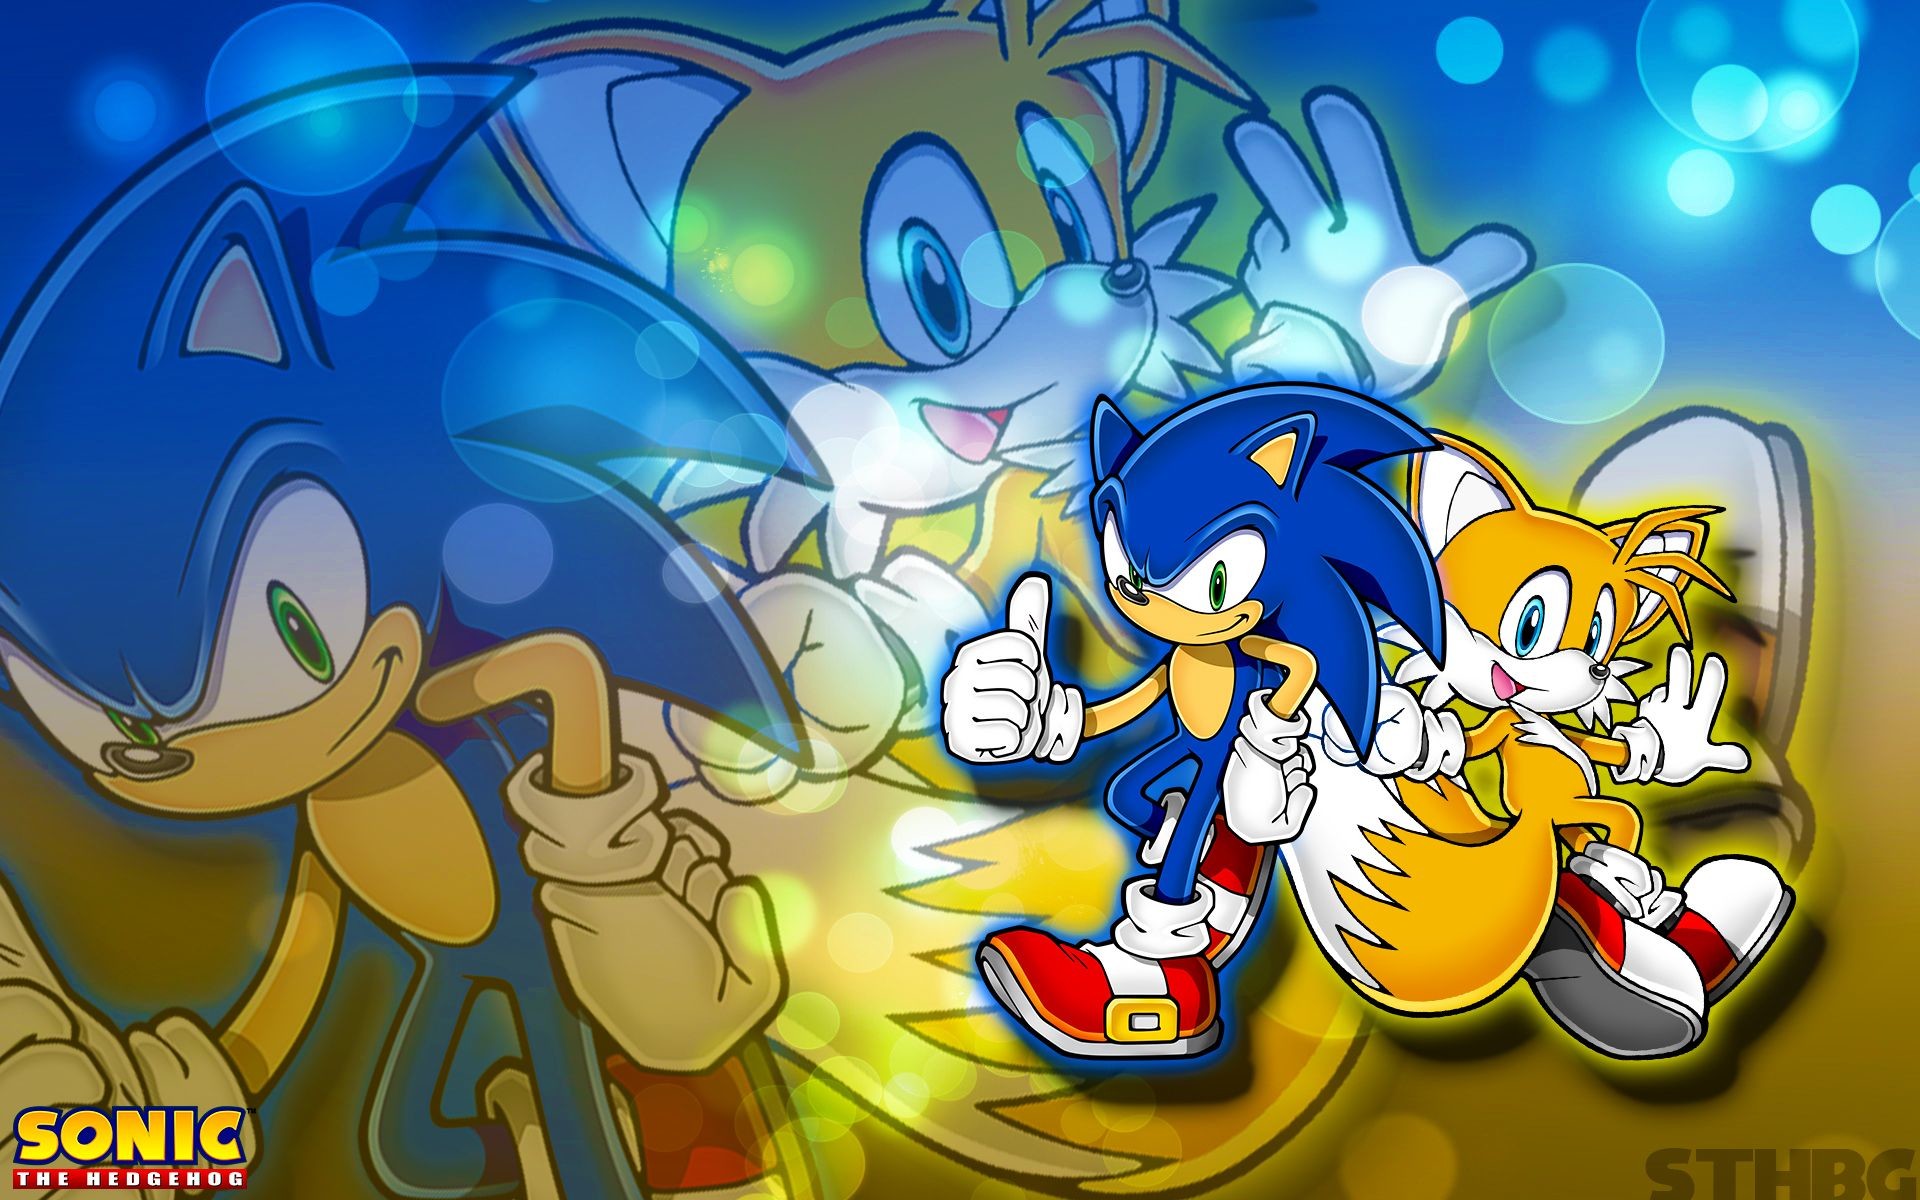 1920x1200 Sonic And Tails Wallpaper by SonicTheHedgehogBG on DeviantArt